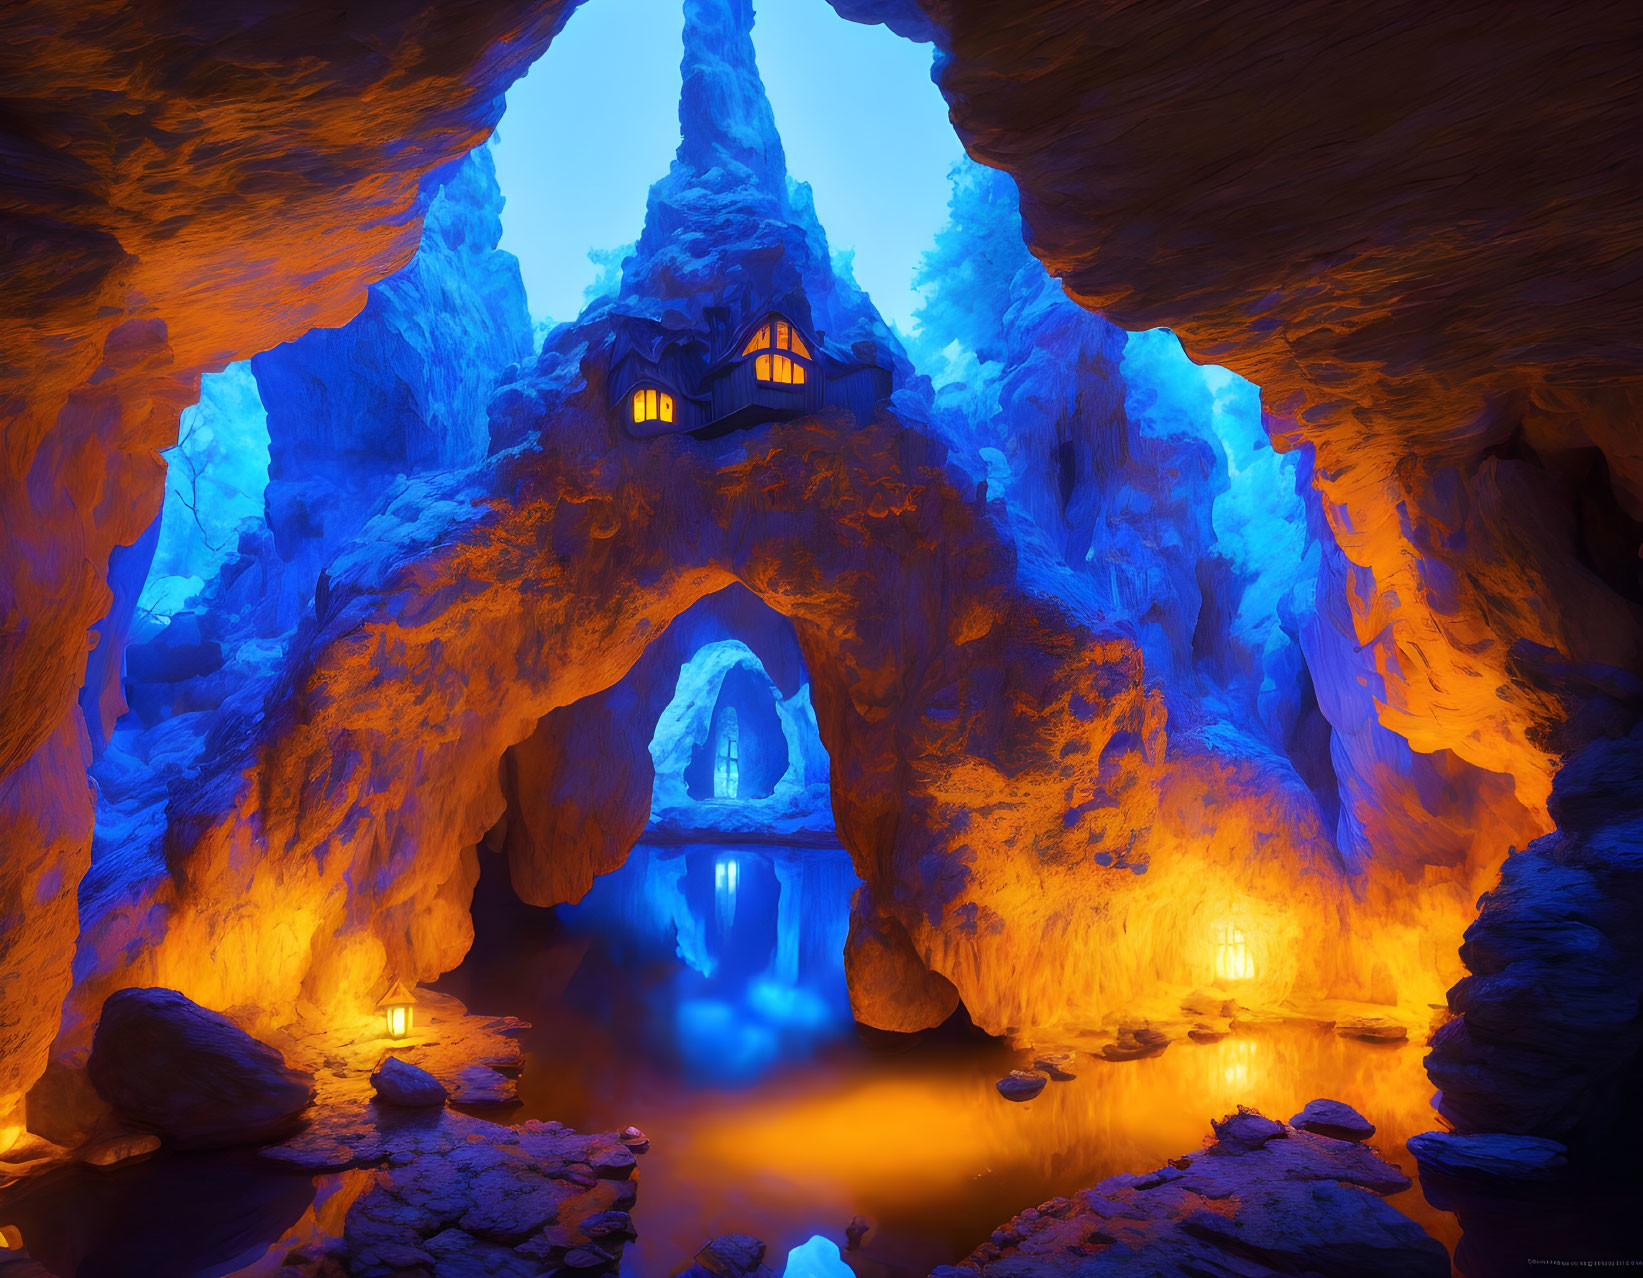 Luminous Blue Cave with Cozy House on Rock Formation